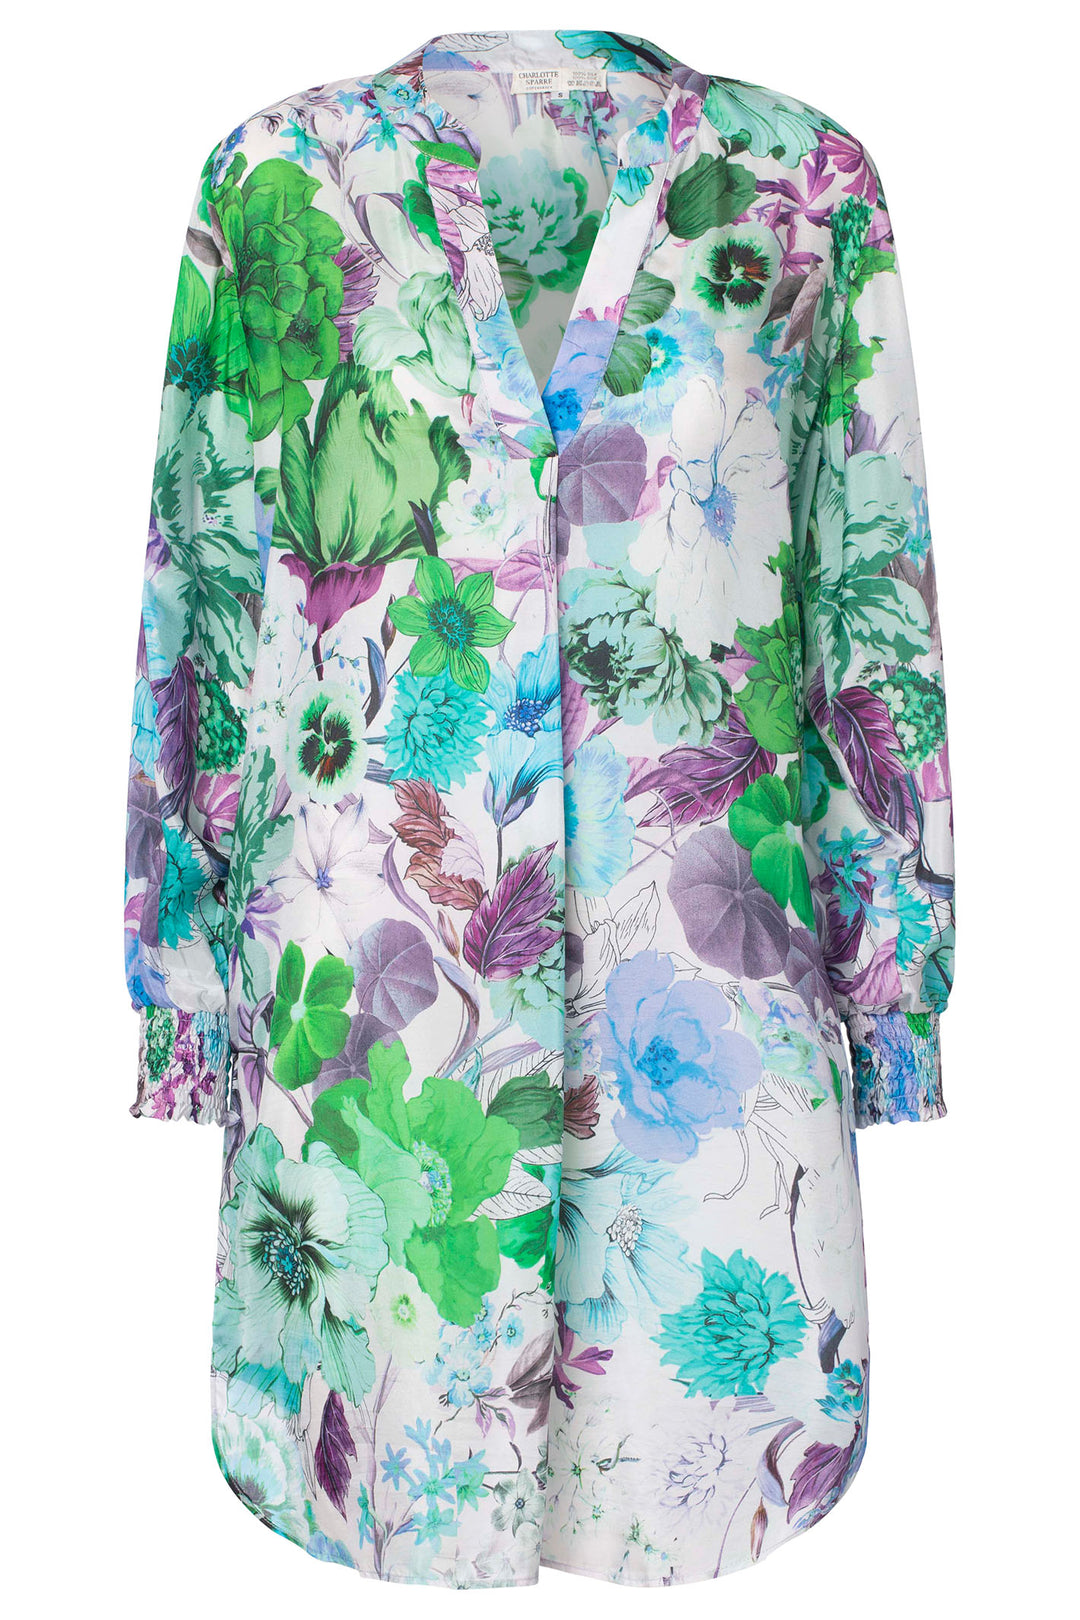 Charlotte Sparre 3168 Evy Green Floral Print Tunic Shirt Top - Olivia Grace Fashion